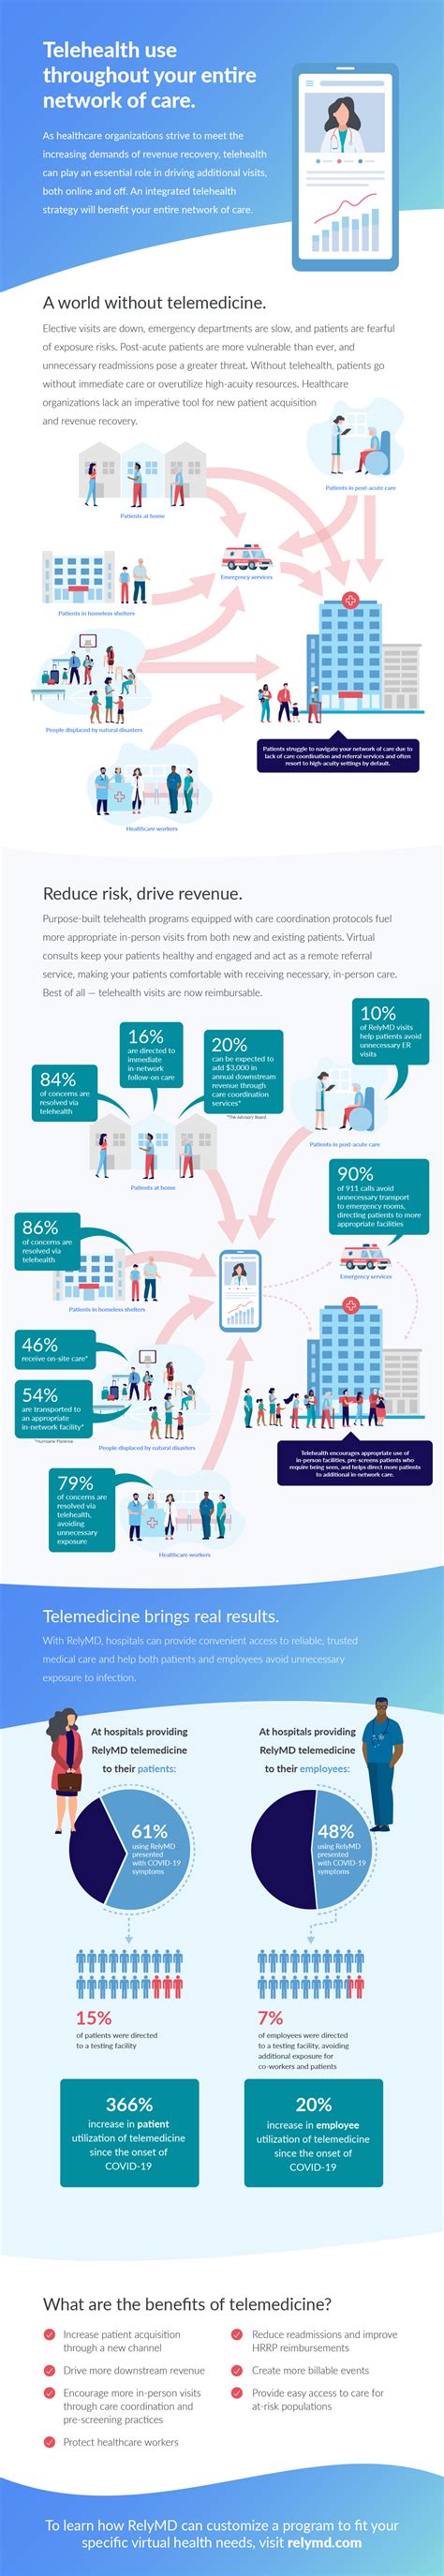 infographic telehealth use throughout your entire network of care relymd